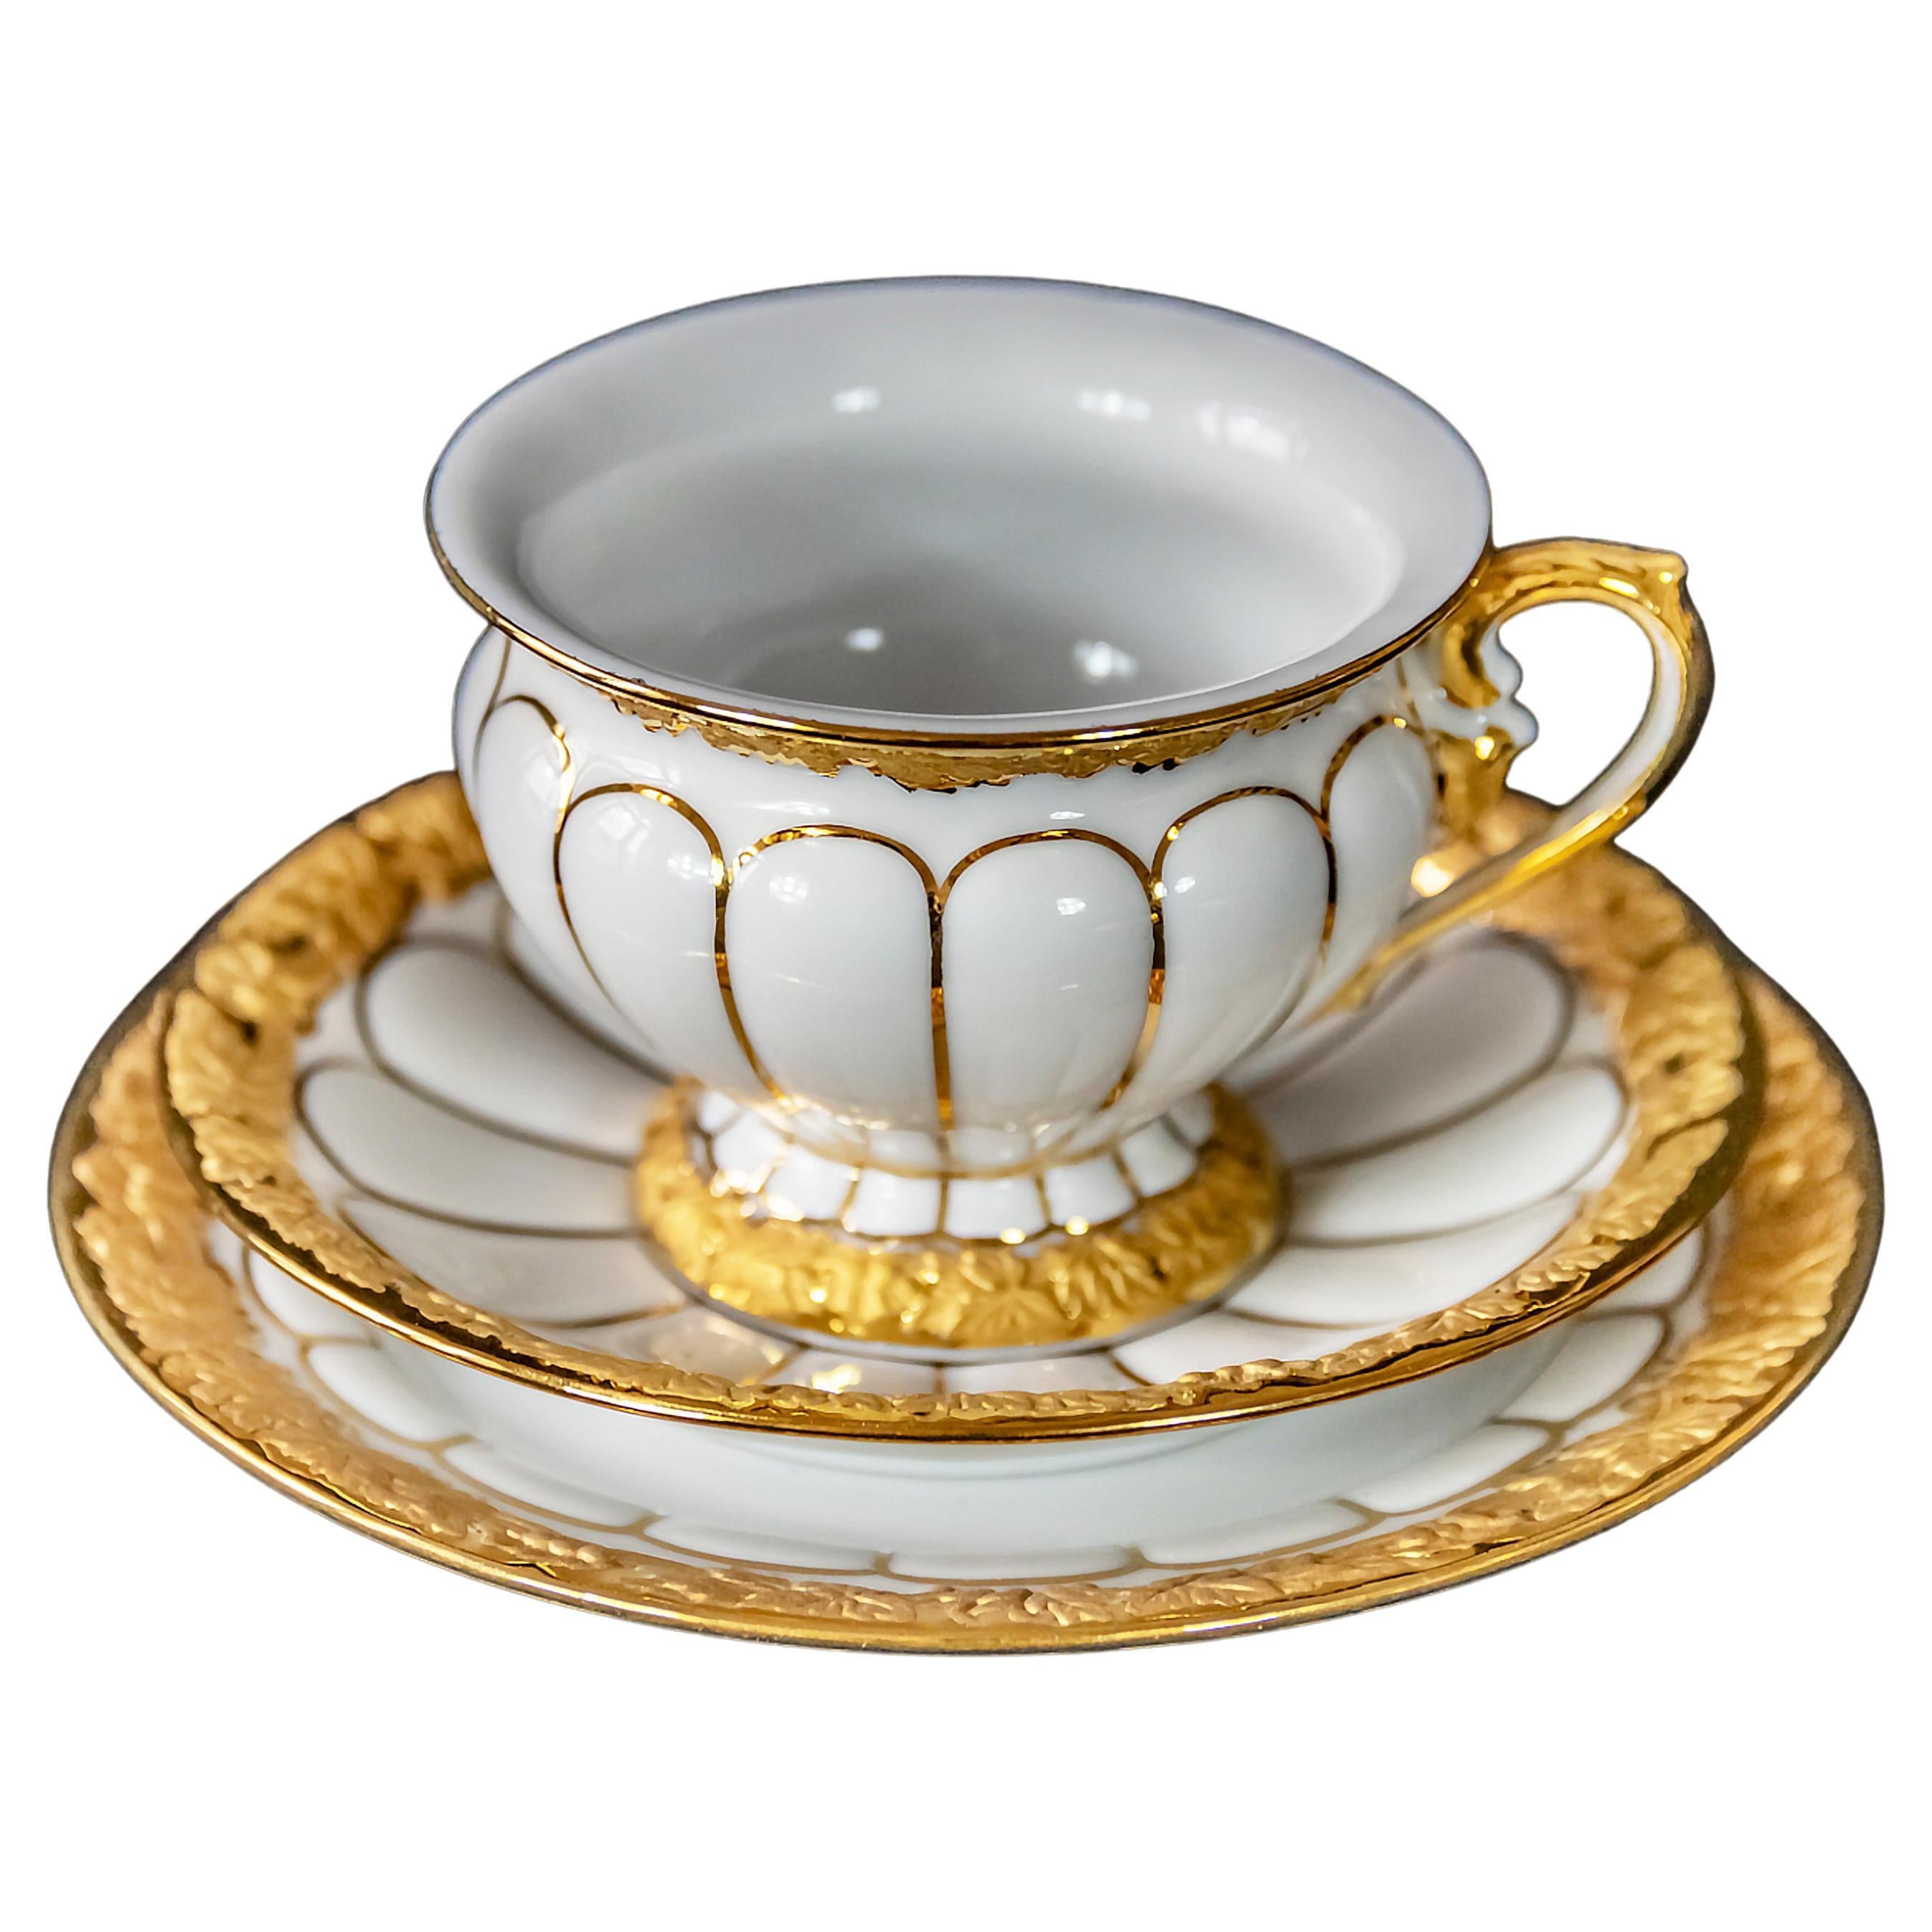 Meissen Porcelain Coffee Cup with Saucer and Dessert Plate